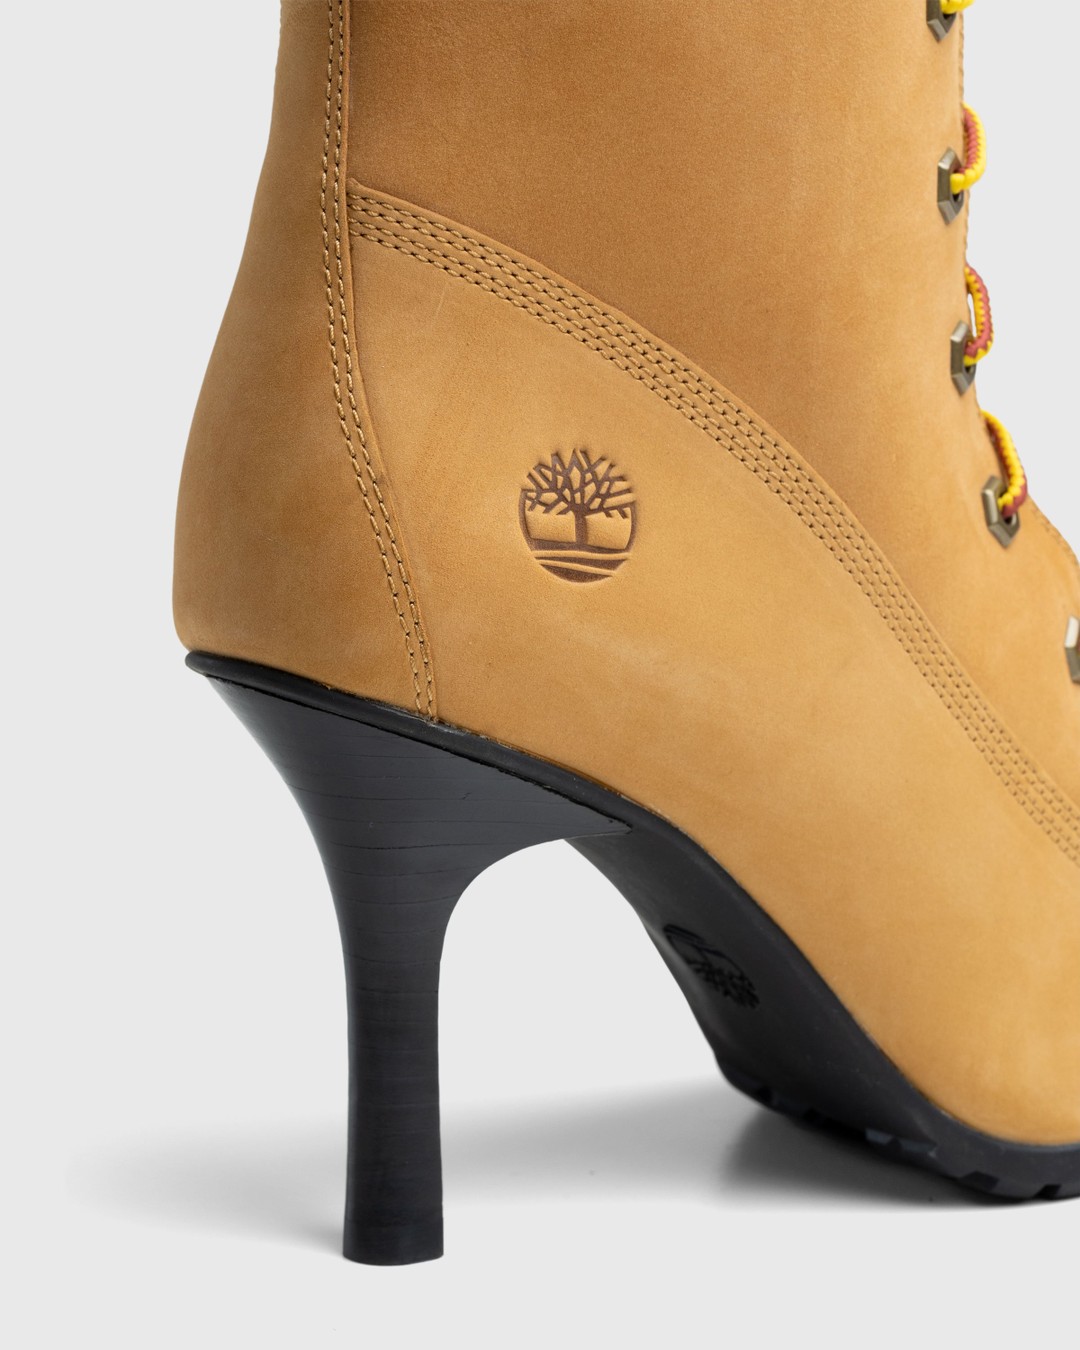 Veneda Carter x Timberland – Tall Lace Boot Yellow - Boots - Brown - Image 4